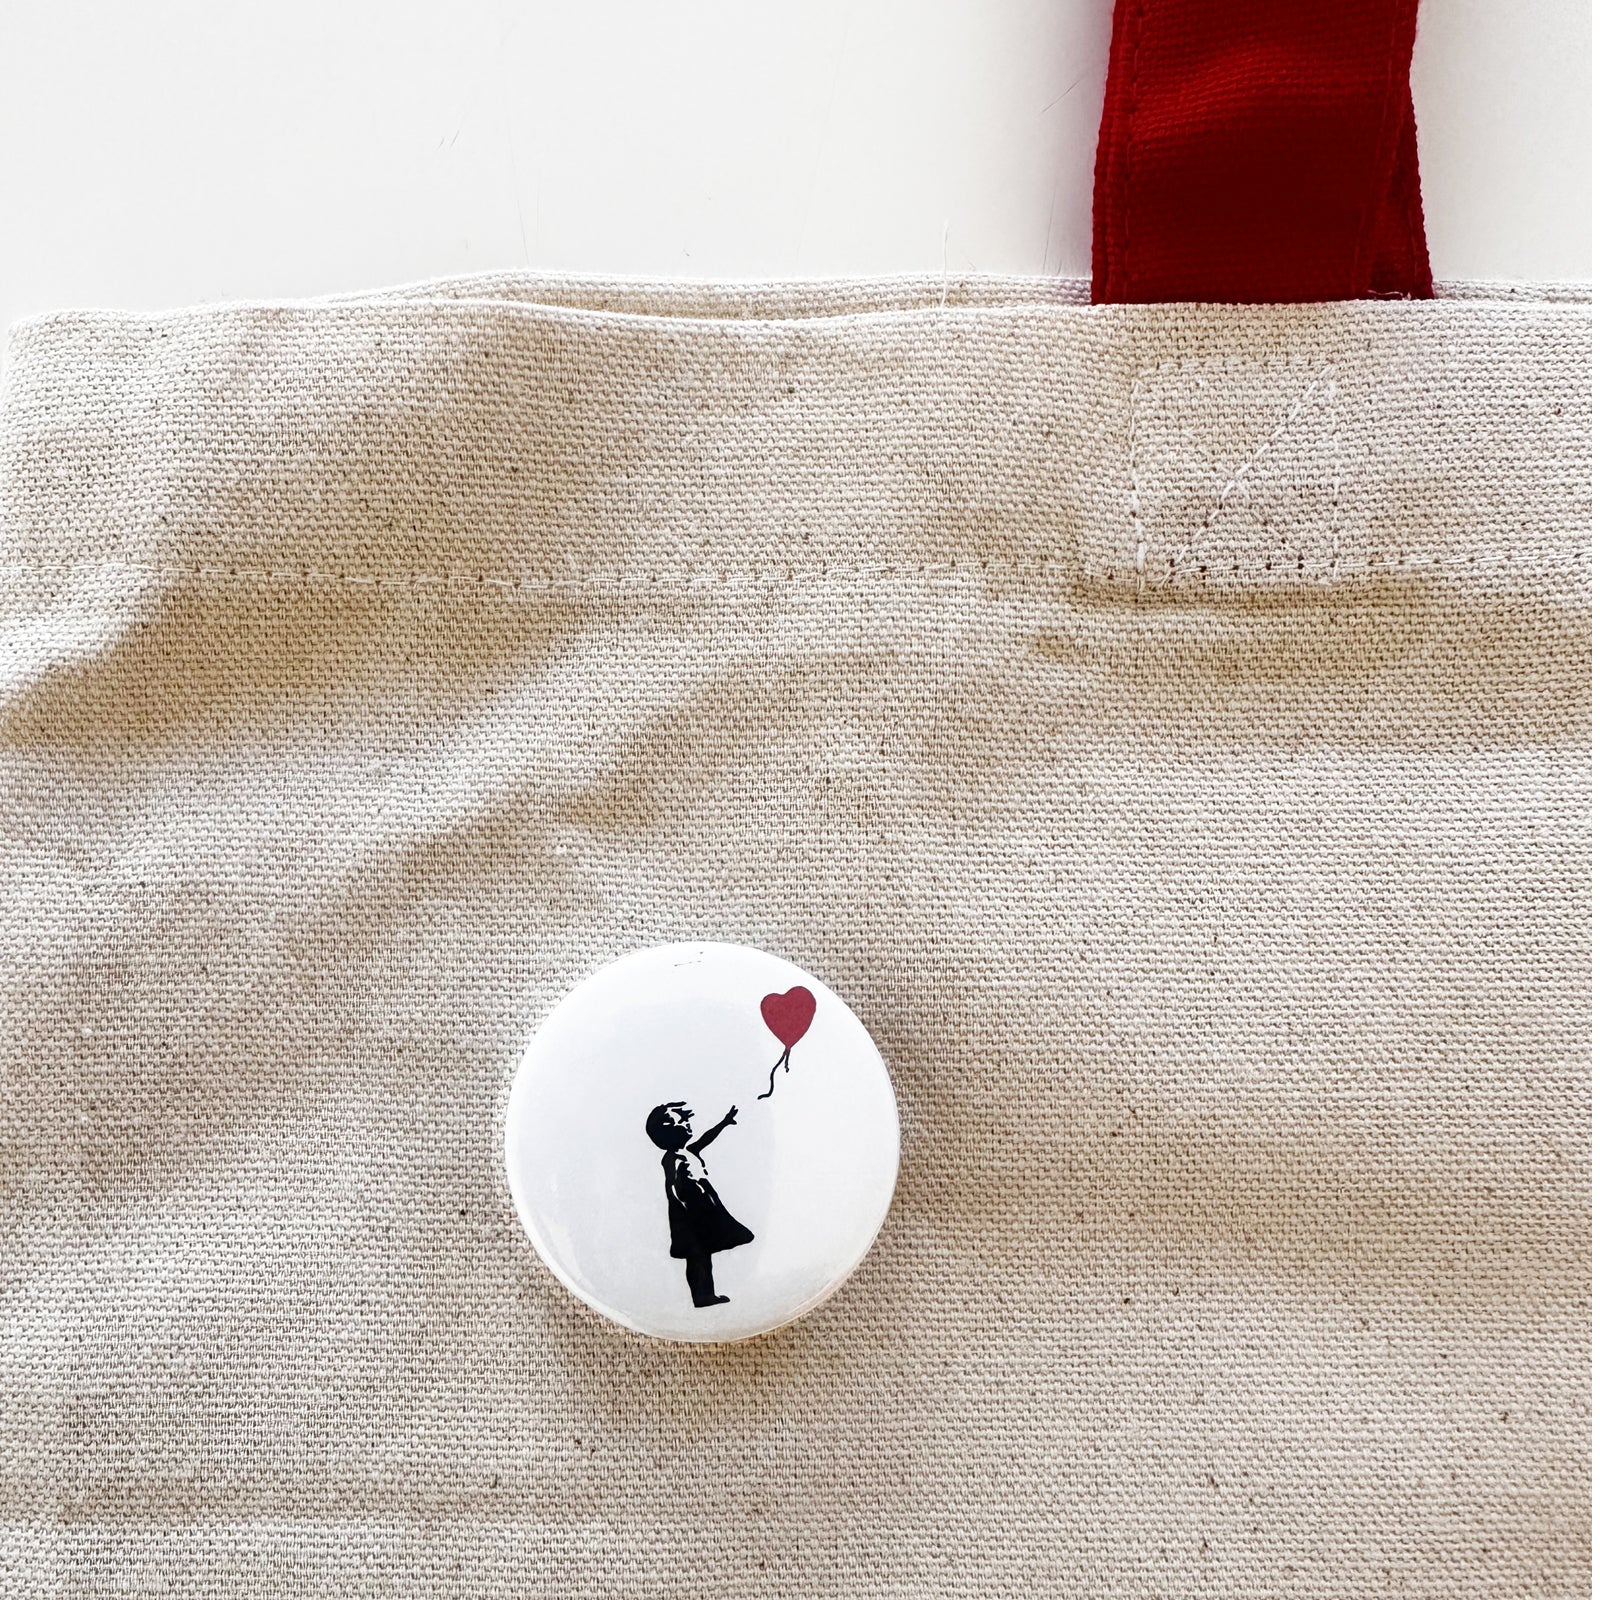 Tote Bag - Girl with red balloon shopper in natural cotton 220 g/m2 with pin